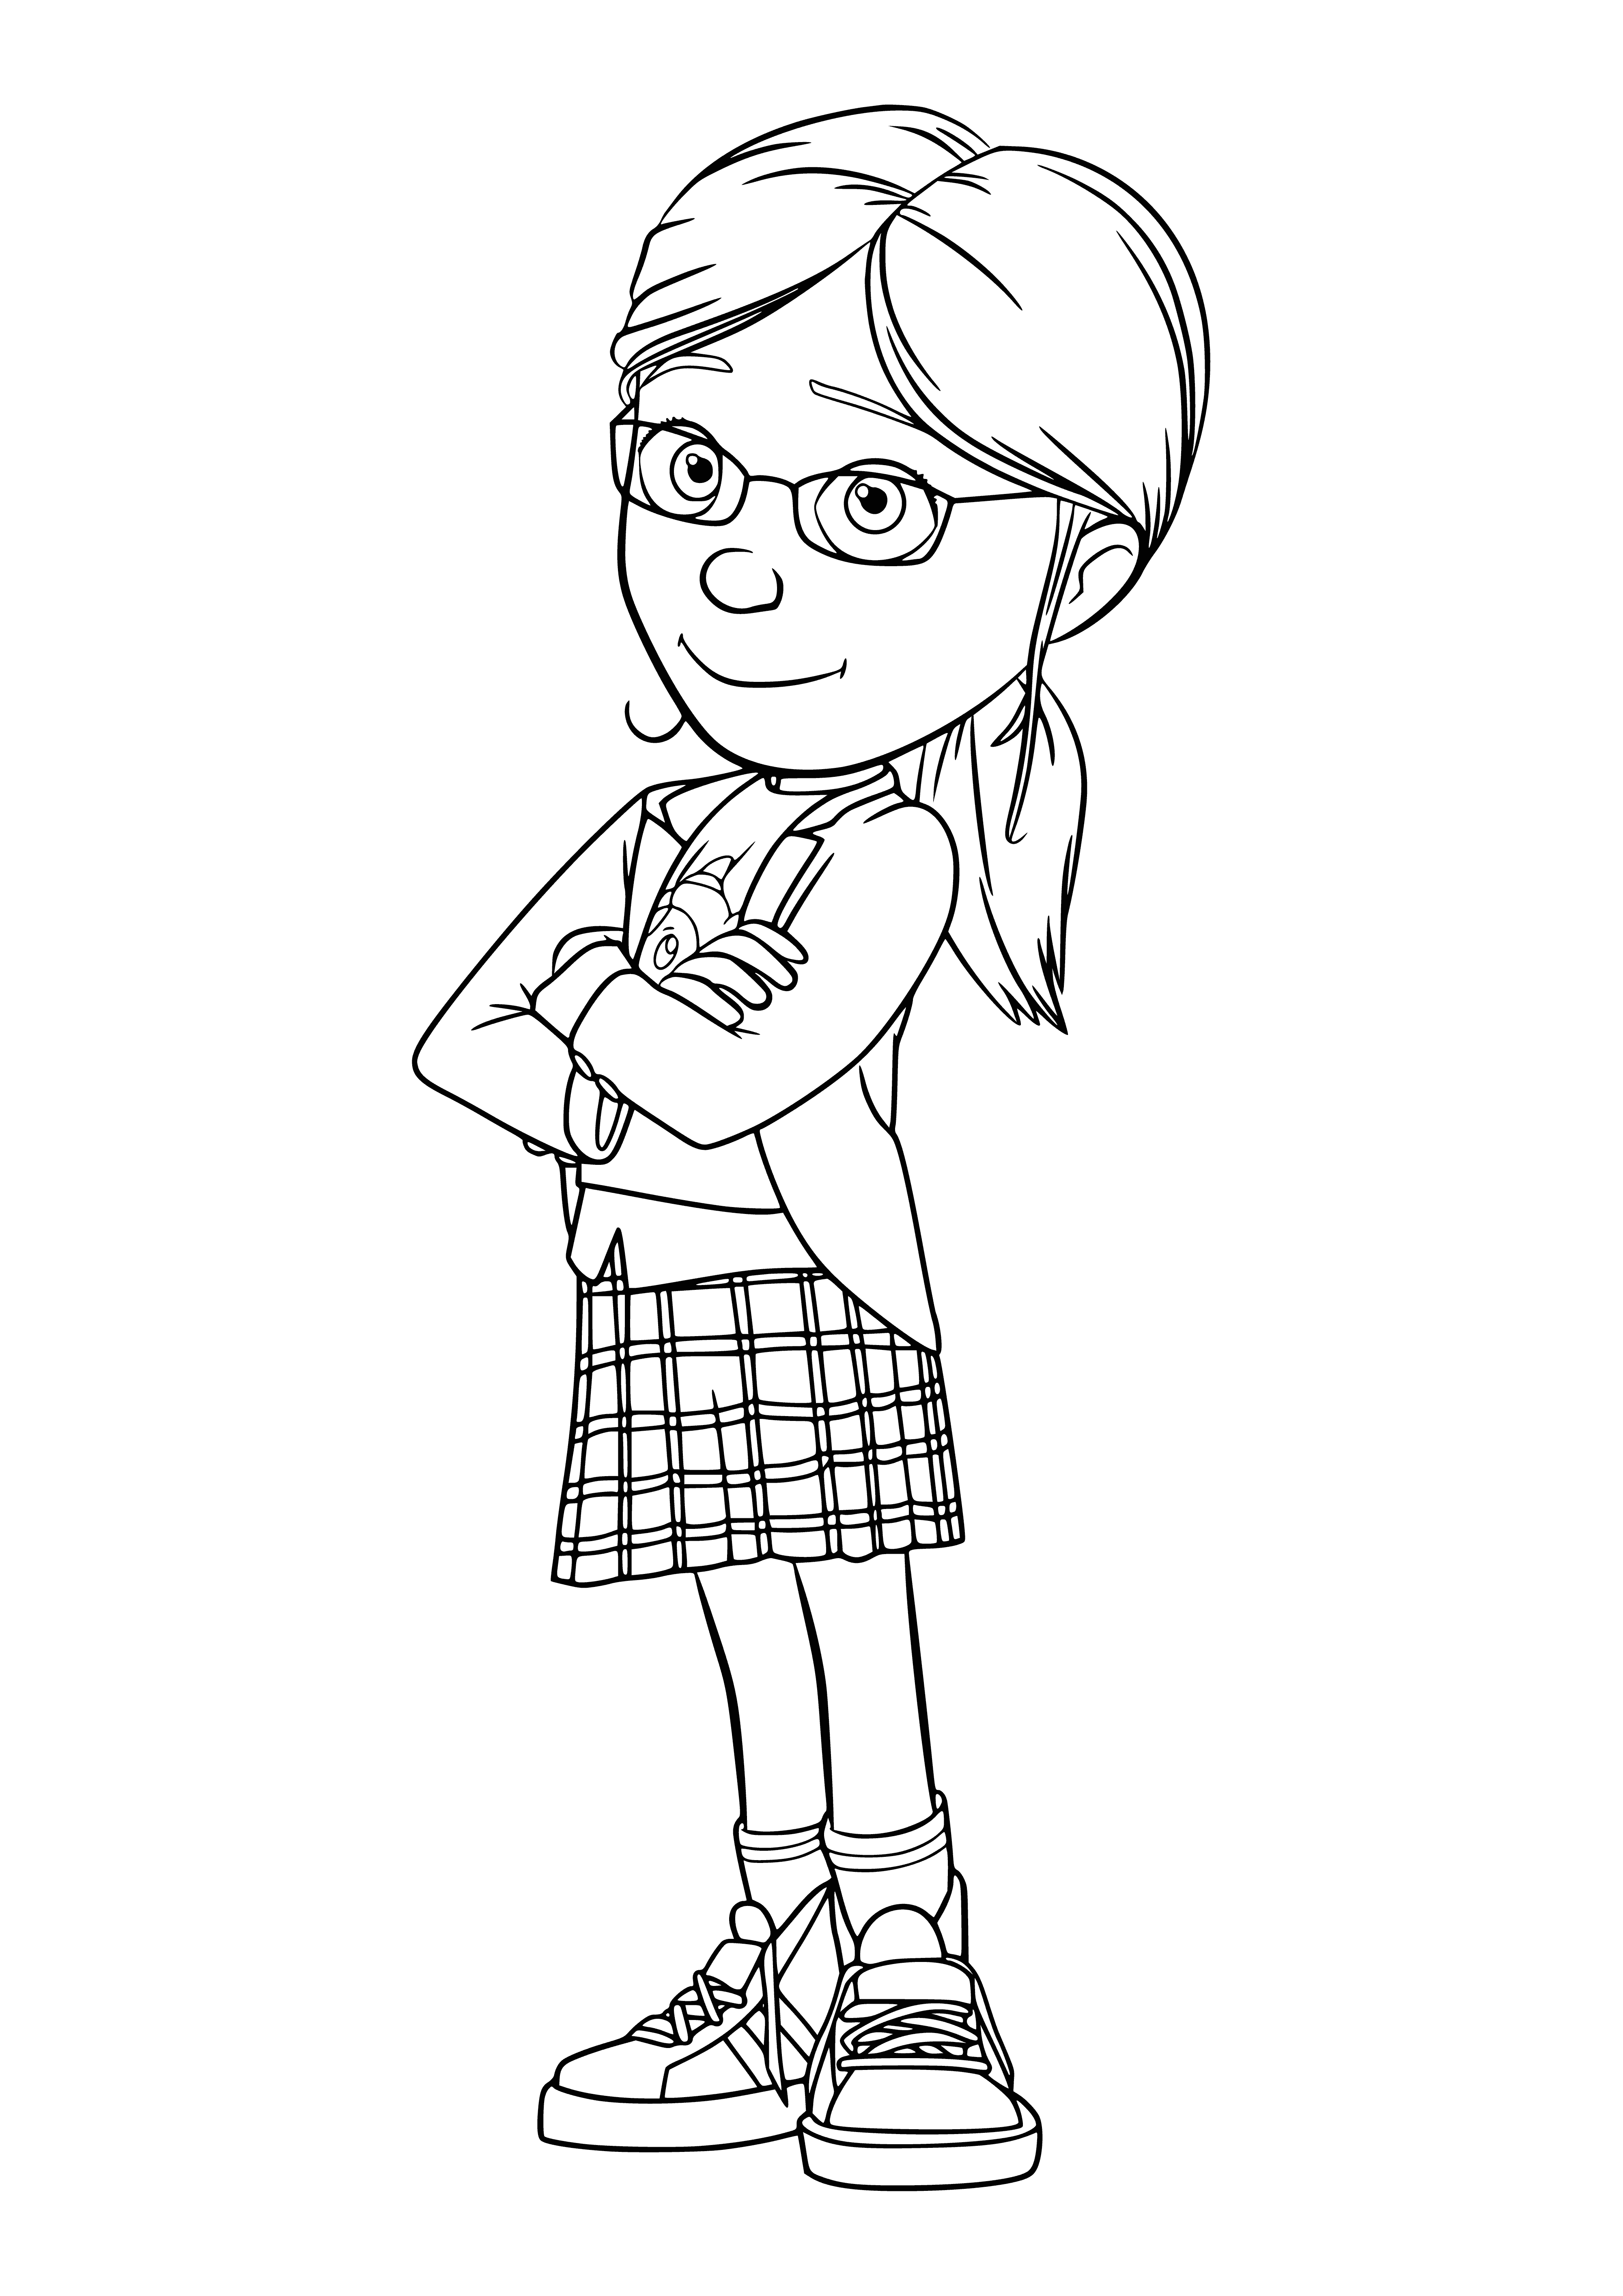 Margot coloring page